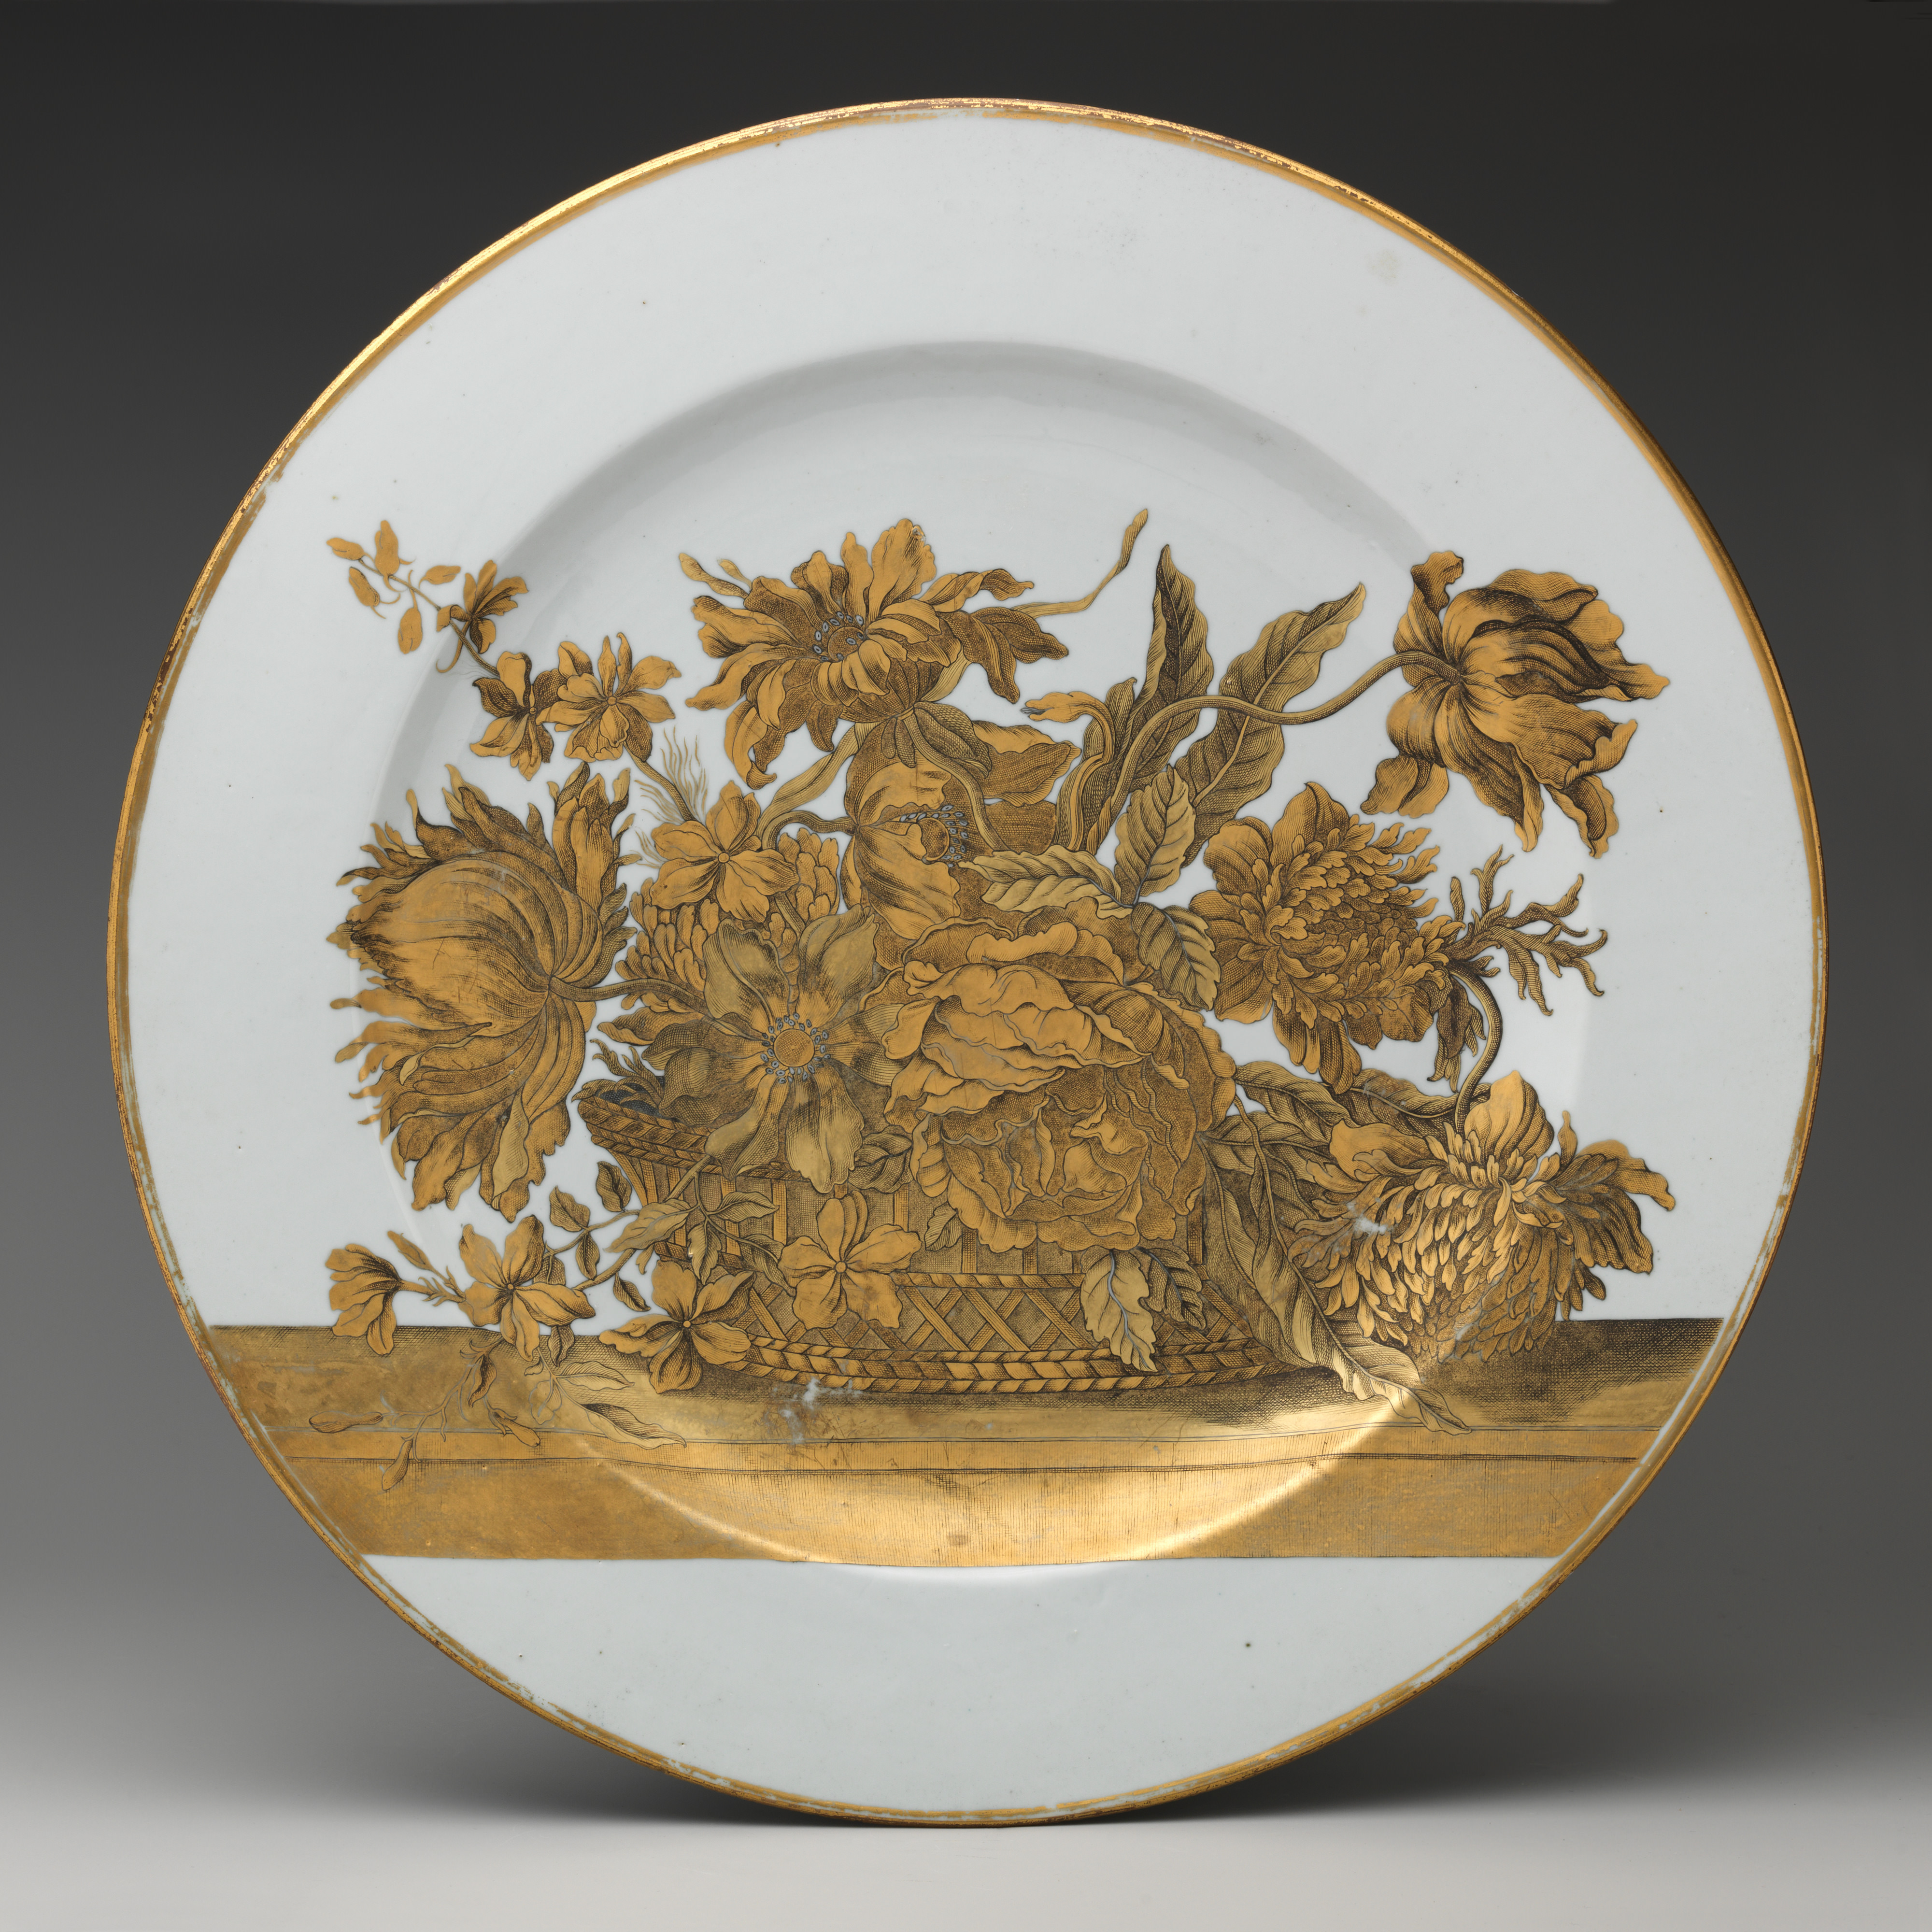 circa 1735–1740, hard-paste porcelain with gilding, 4.8 x 38.7 cm. Collection of The Metropolitan Museum of Art, New York (62.187.1).